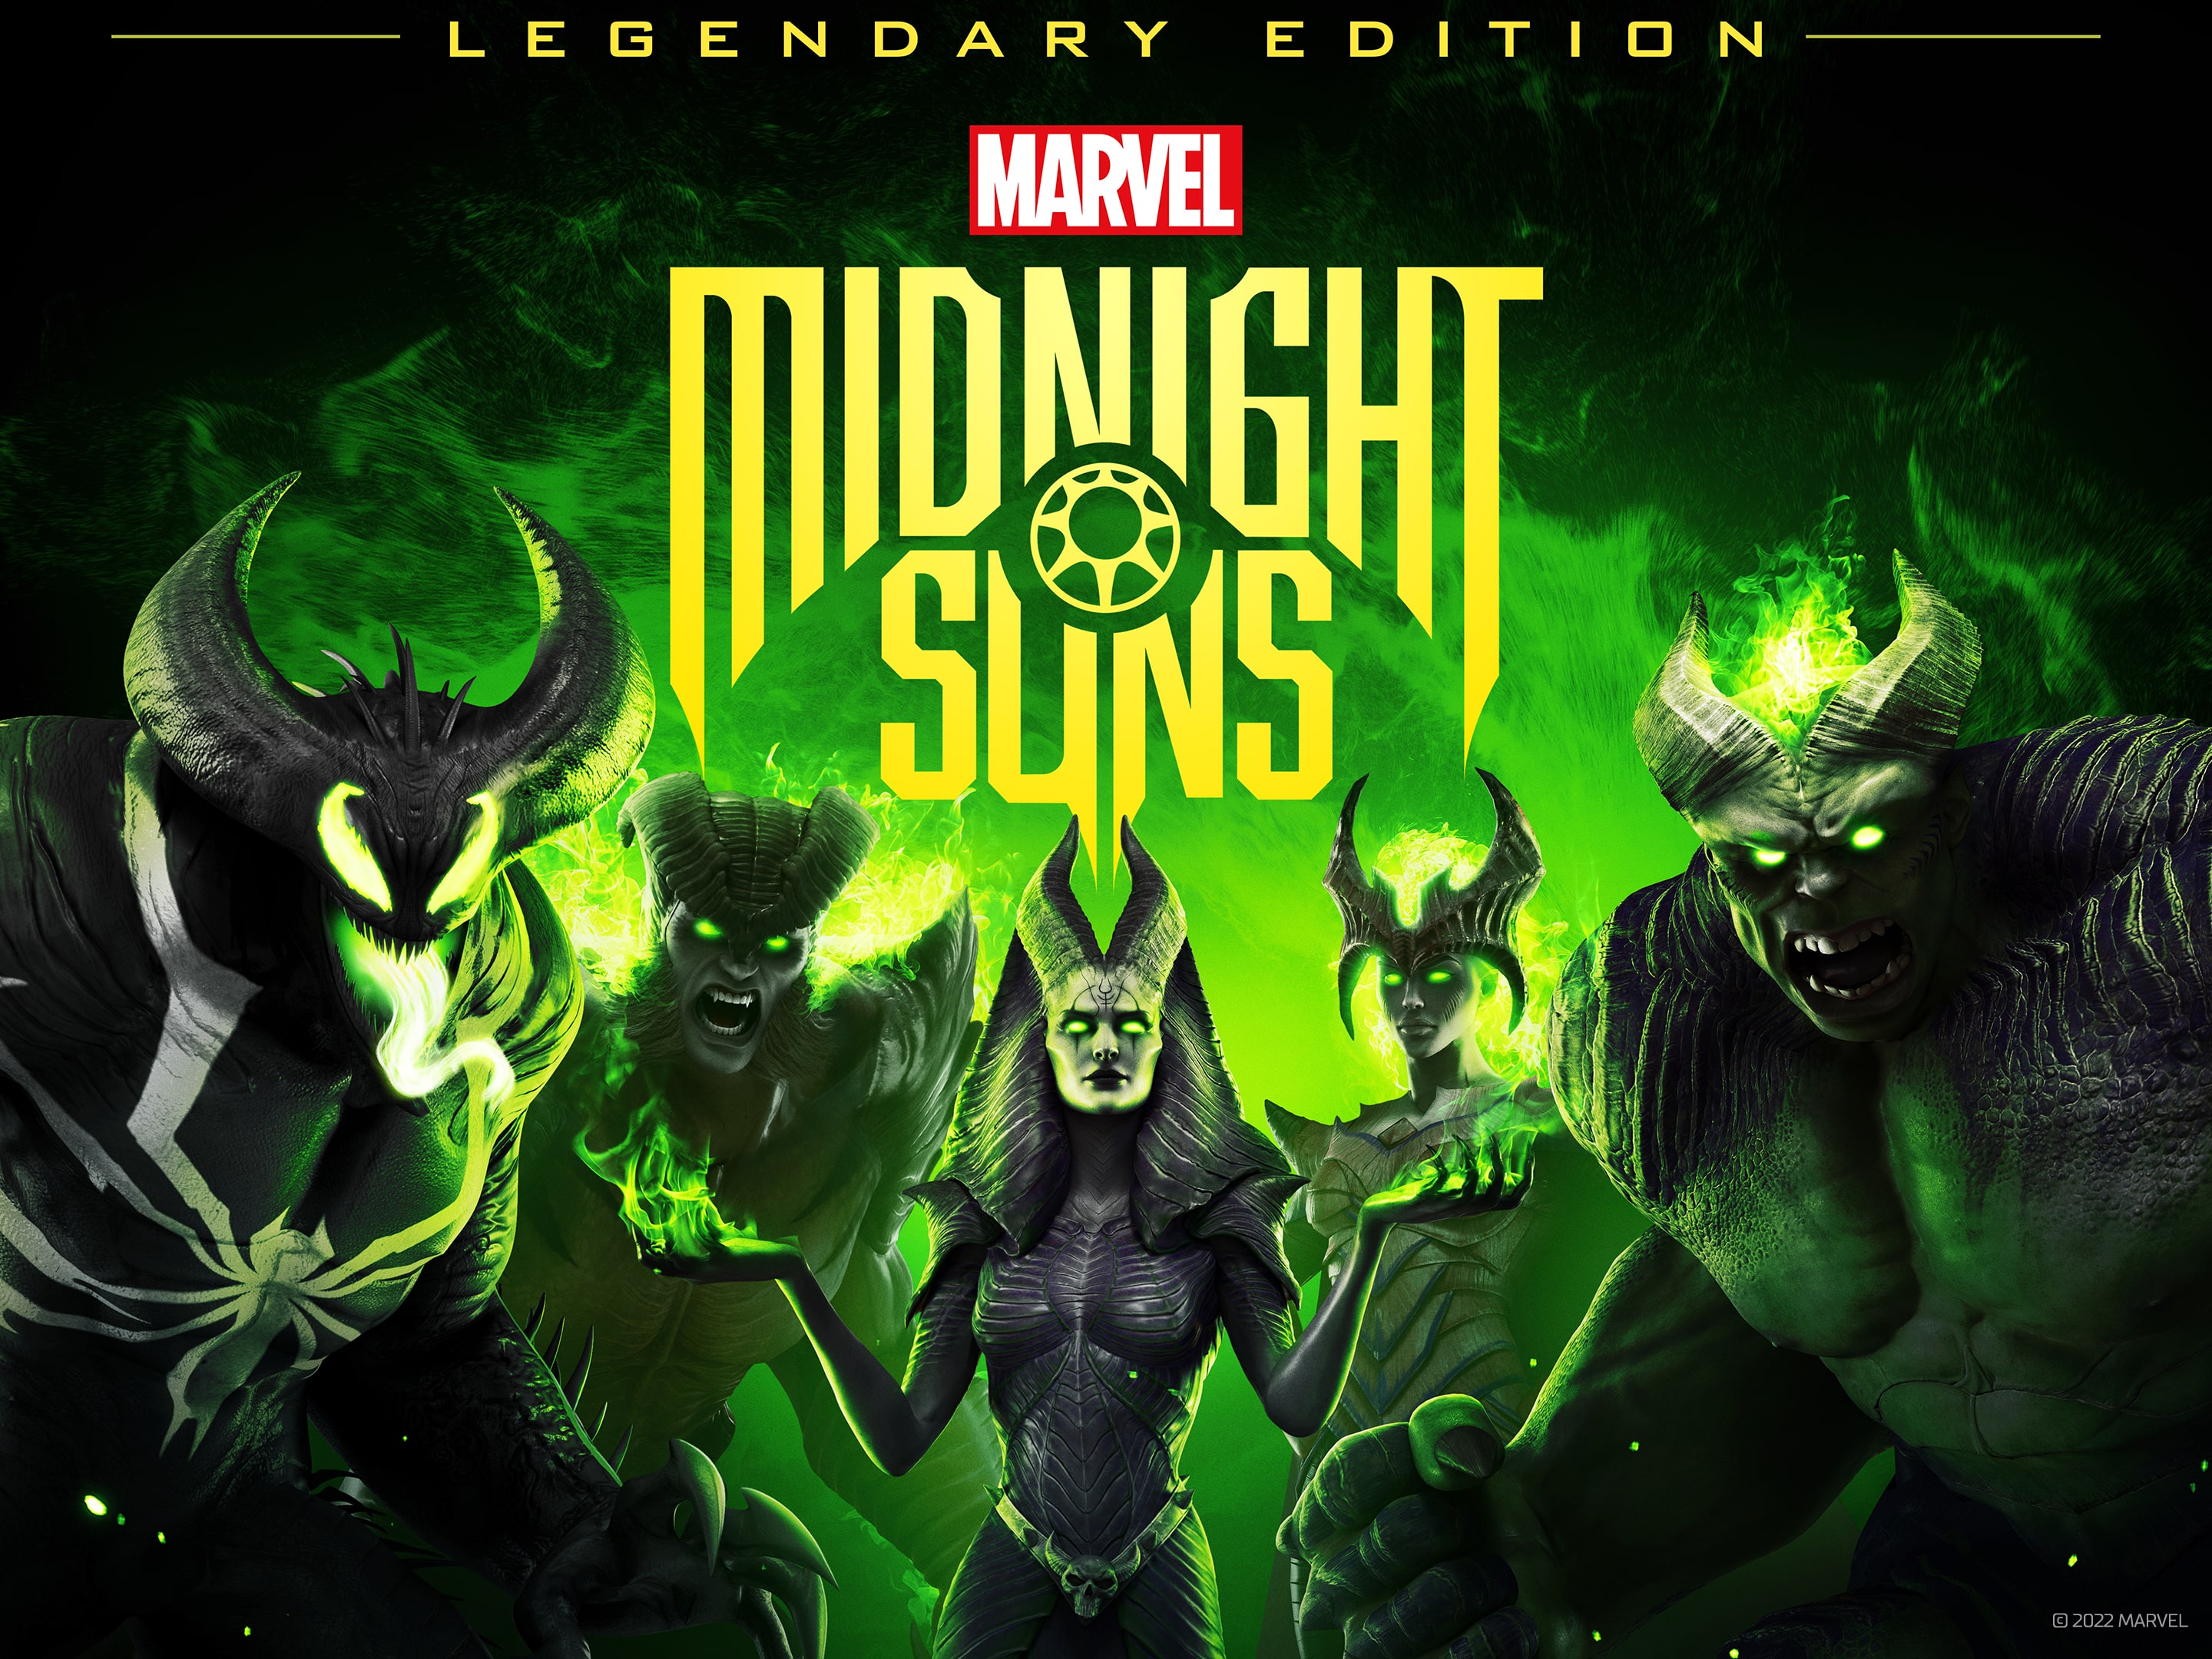 Who Are Marvel's Midnight Suns?